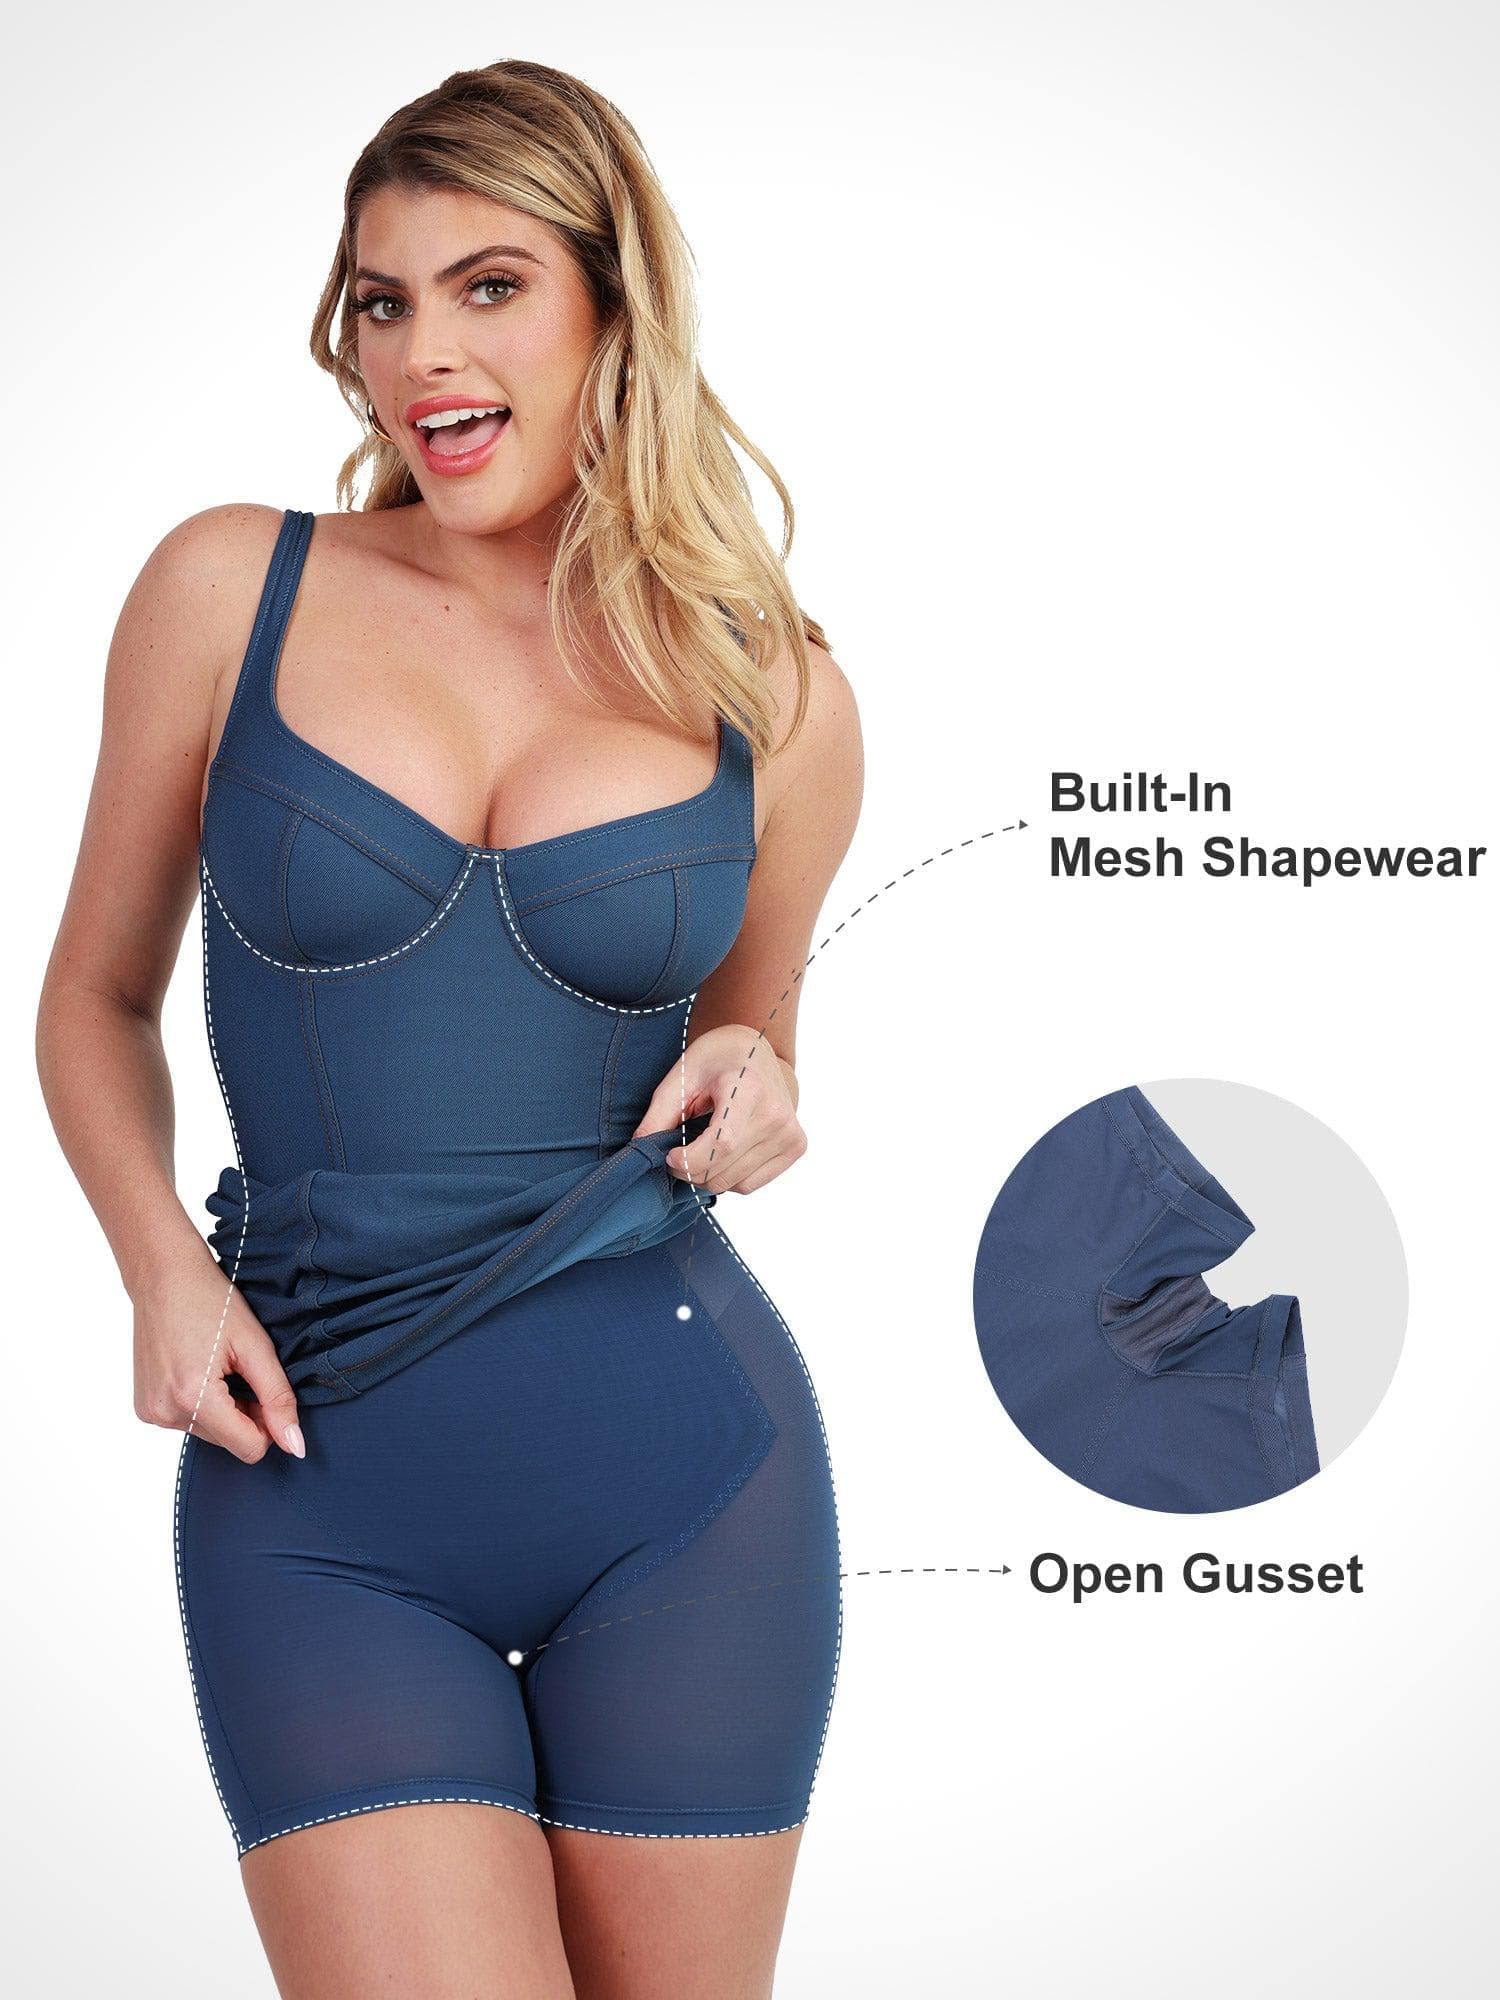 Vintage Inspired Lingerie News – tagged plus size shapewear